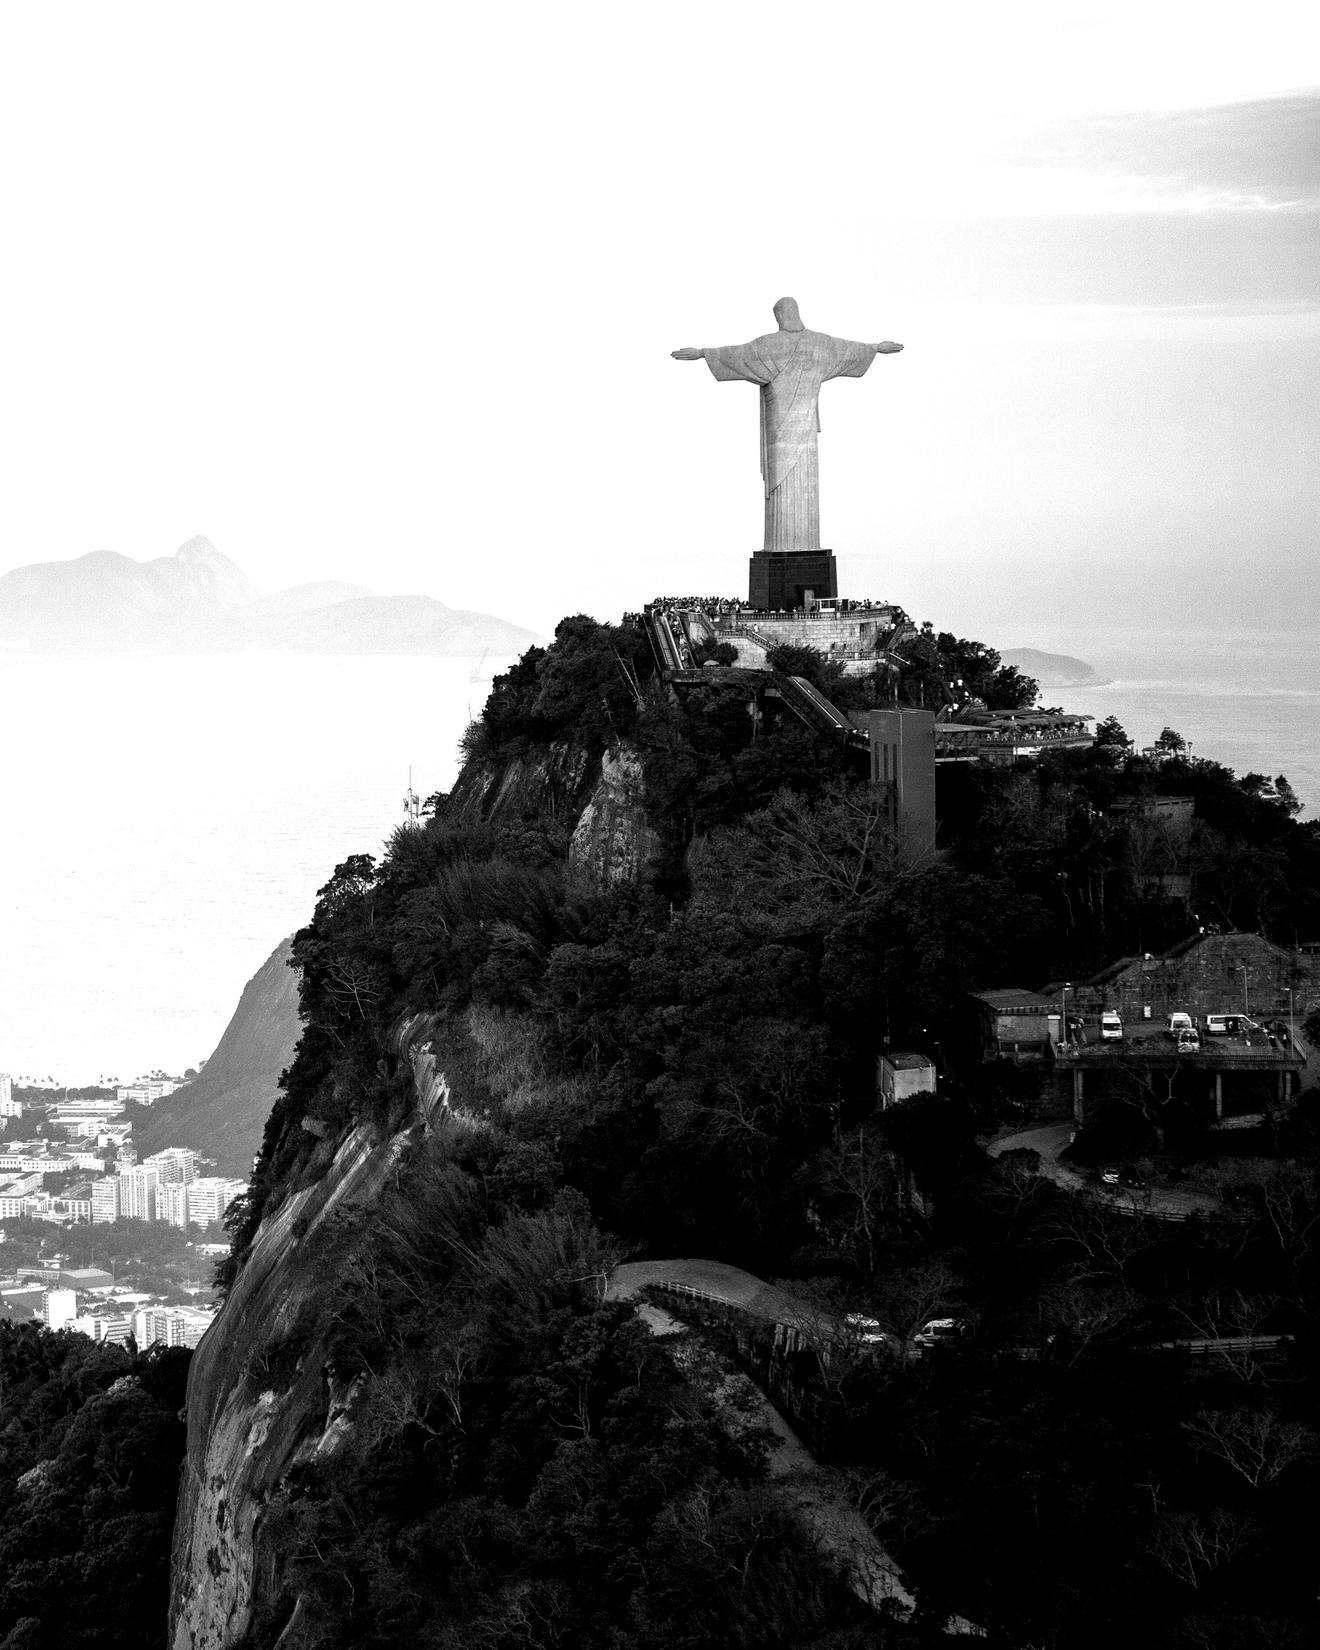 Black and white image of Christ the Redeemer statue on a mountain overlooking the city of Rio de Janeiro